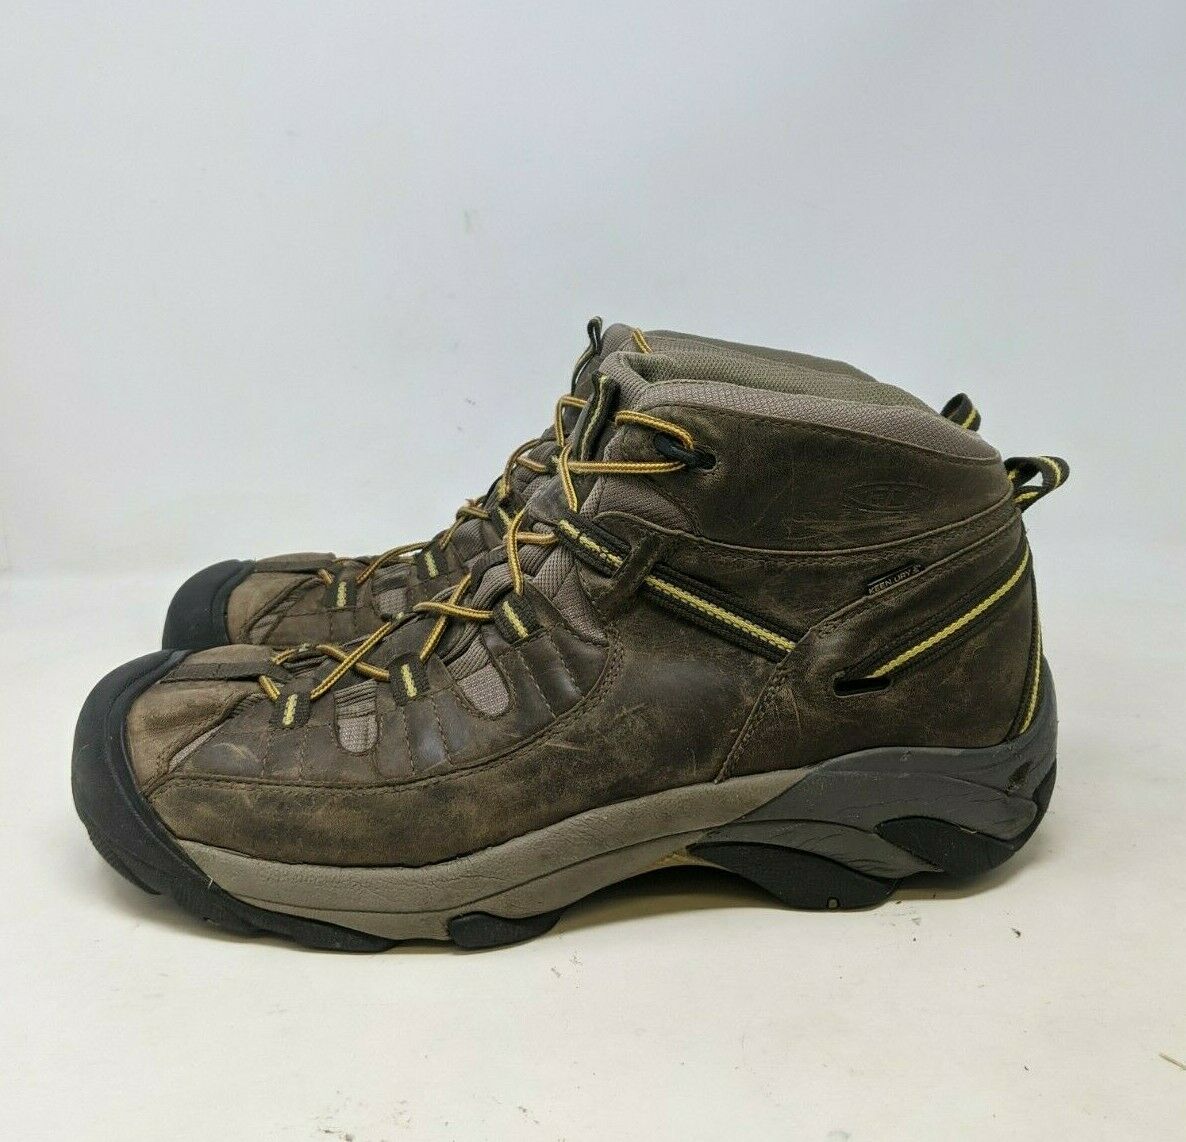 KEEN 1002375 Men's Targhee II Mid Hiking Boot Size 15 Brown Outdoors Leather